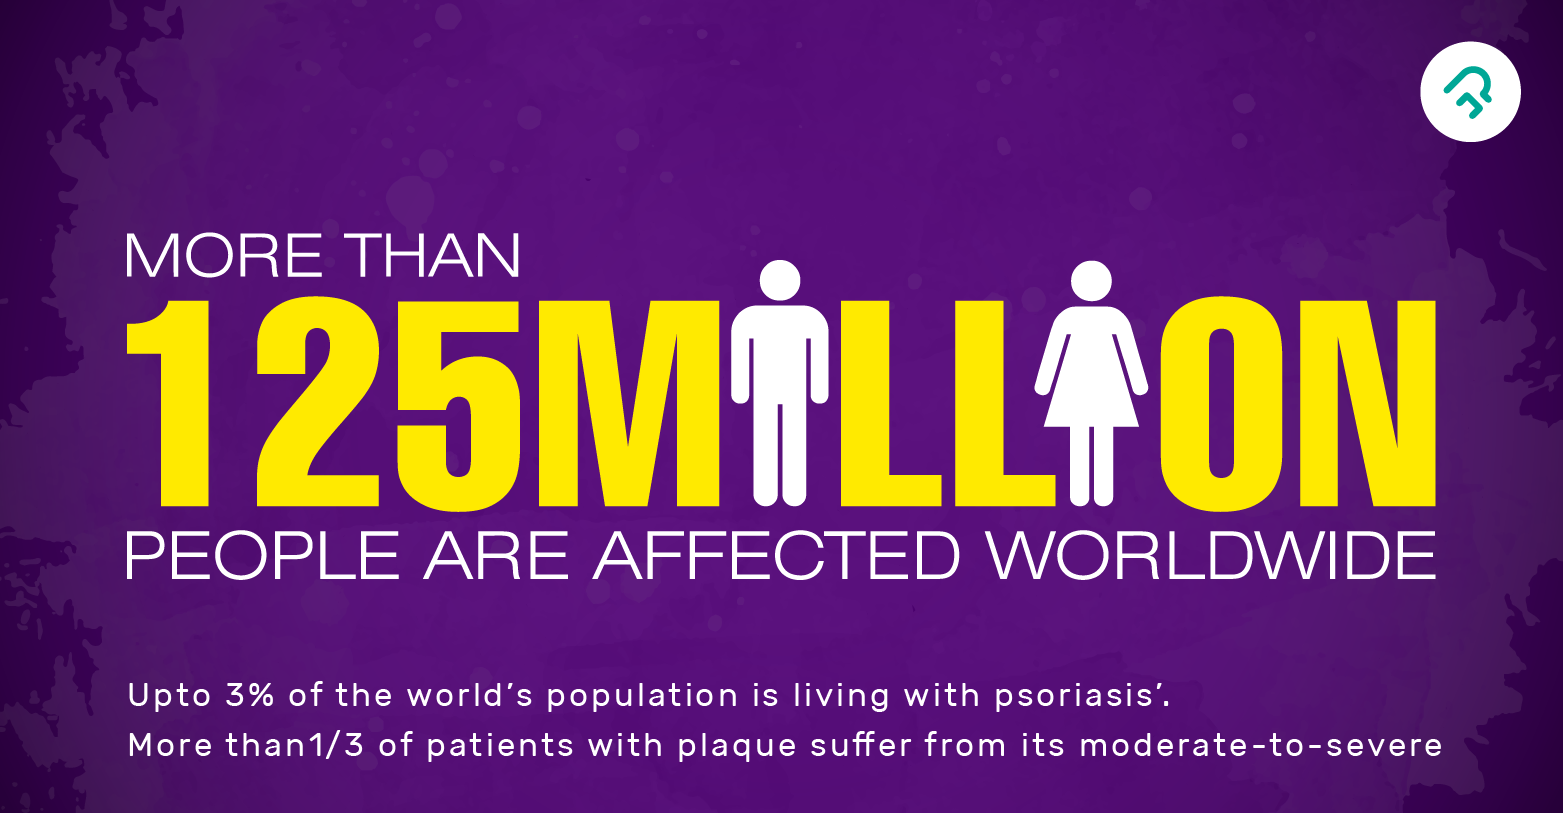 More than 125 Million People are affected by psoriasis worldwide - Psoriasis Symptoms and types